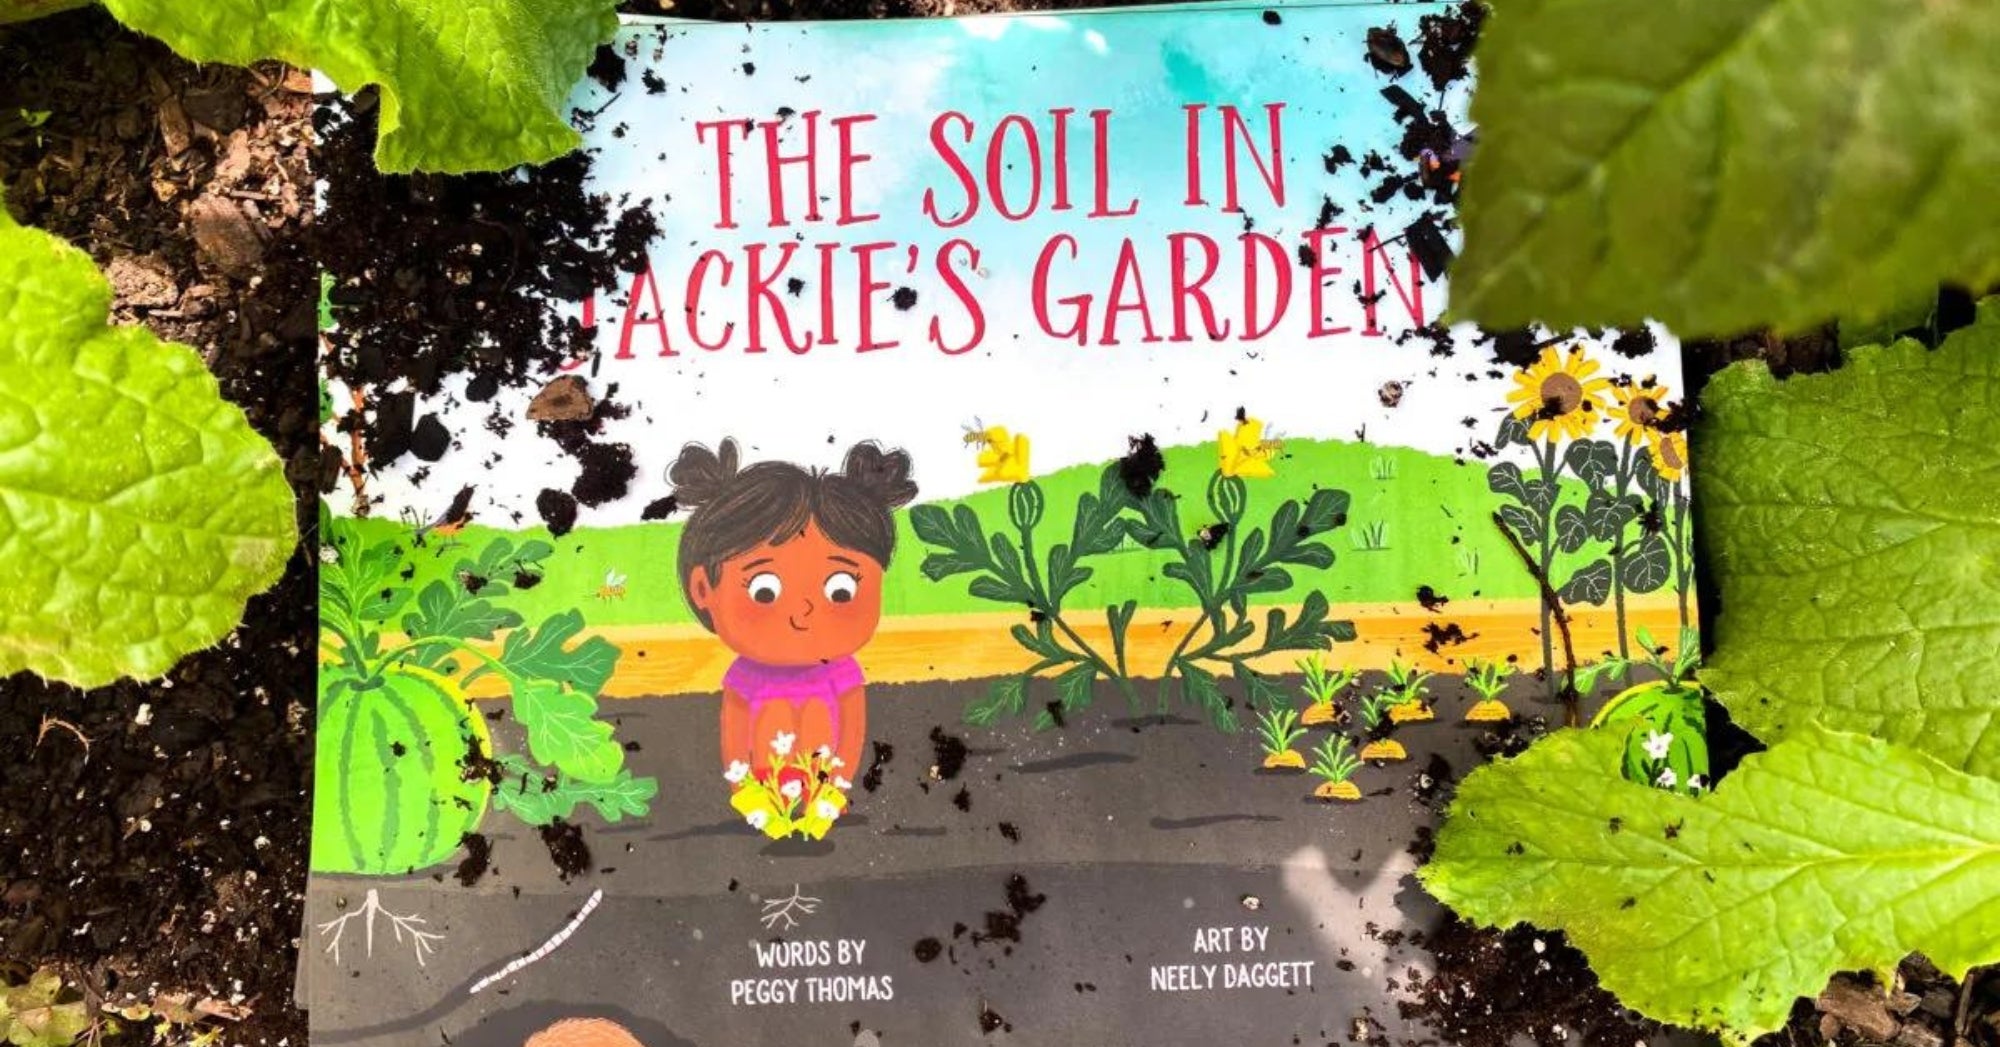 Farm Bureau introduces children to the world of soil science with an engaging new book